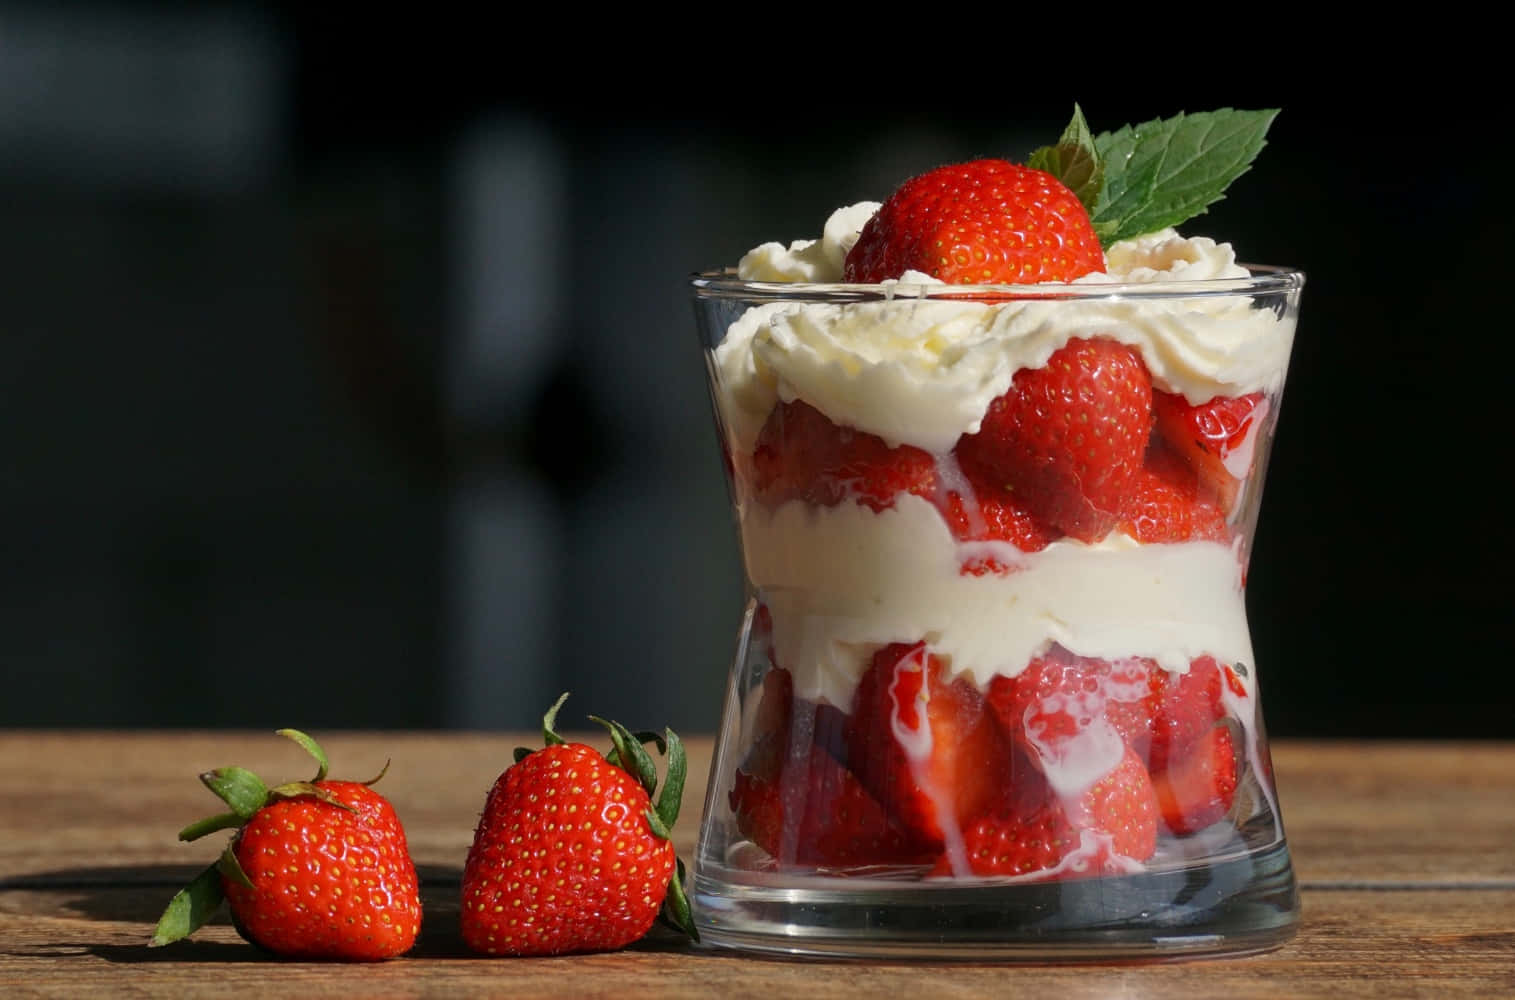 A Glass Of Strawberry Trifle With Whipped Cream And Strawberries